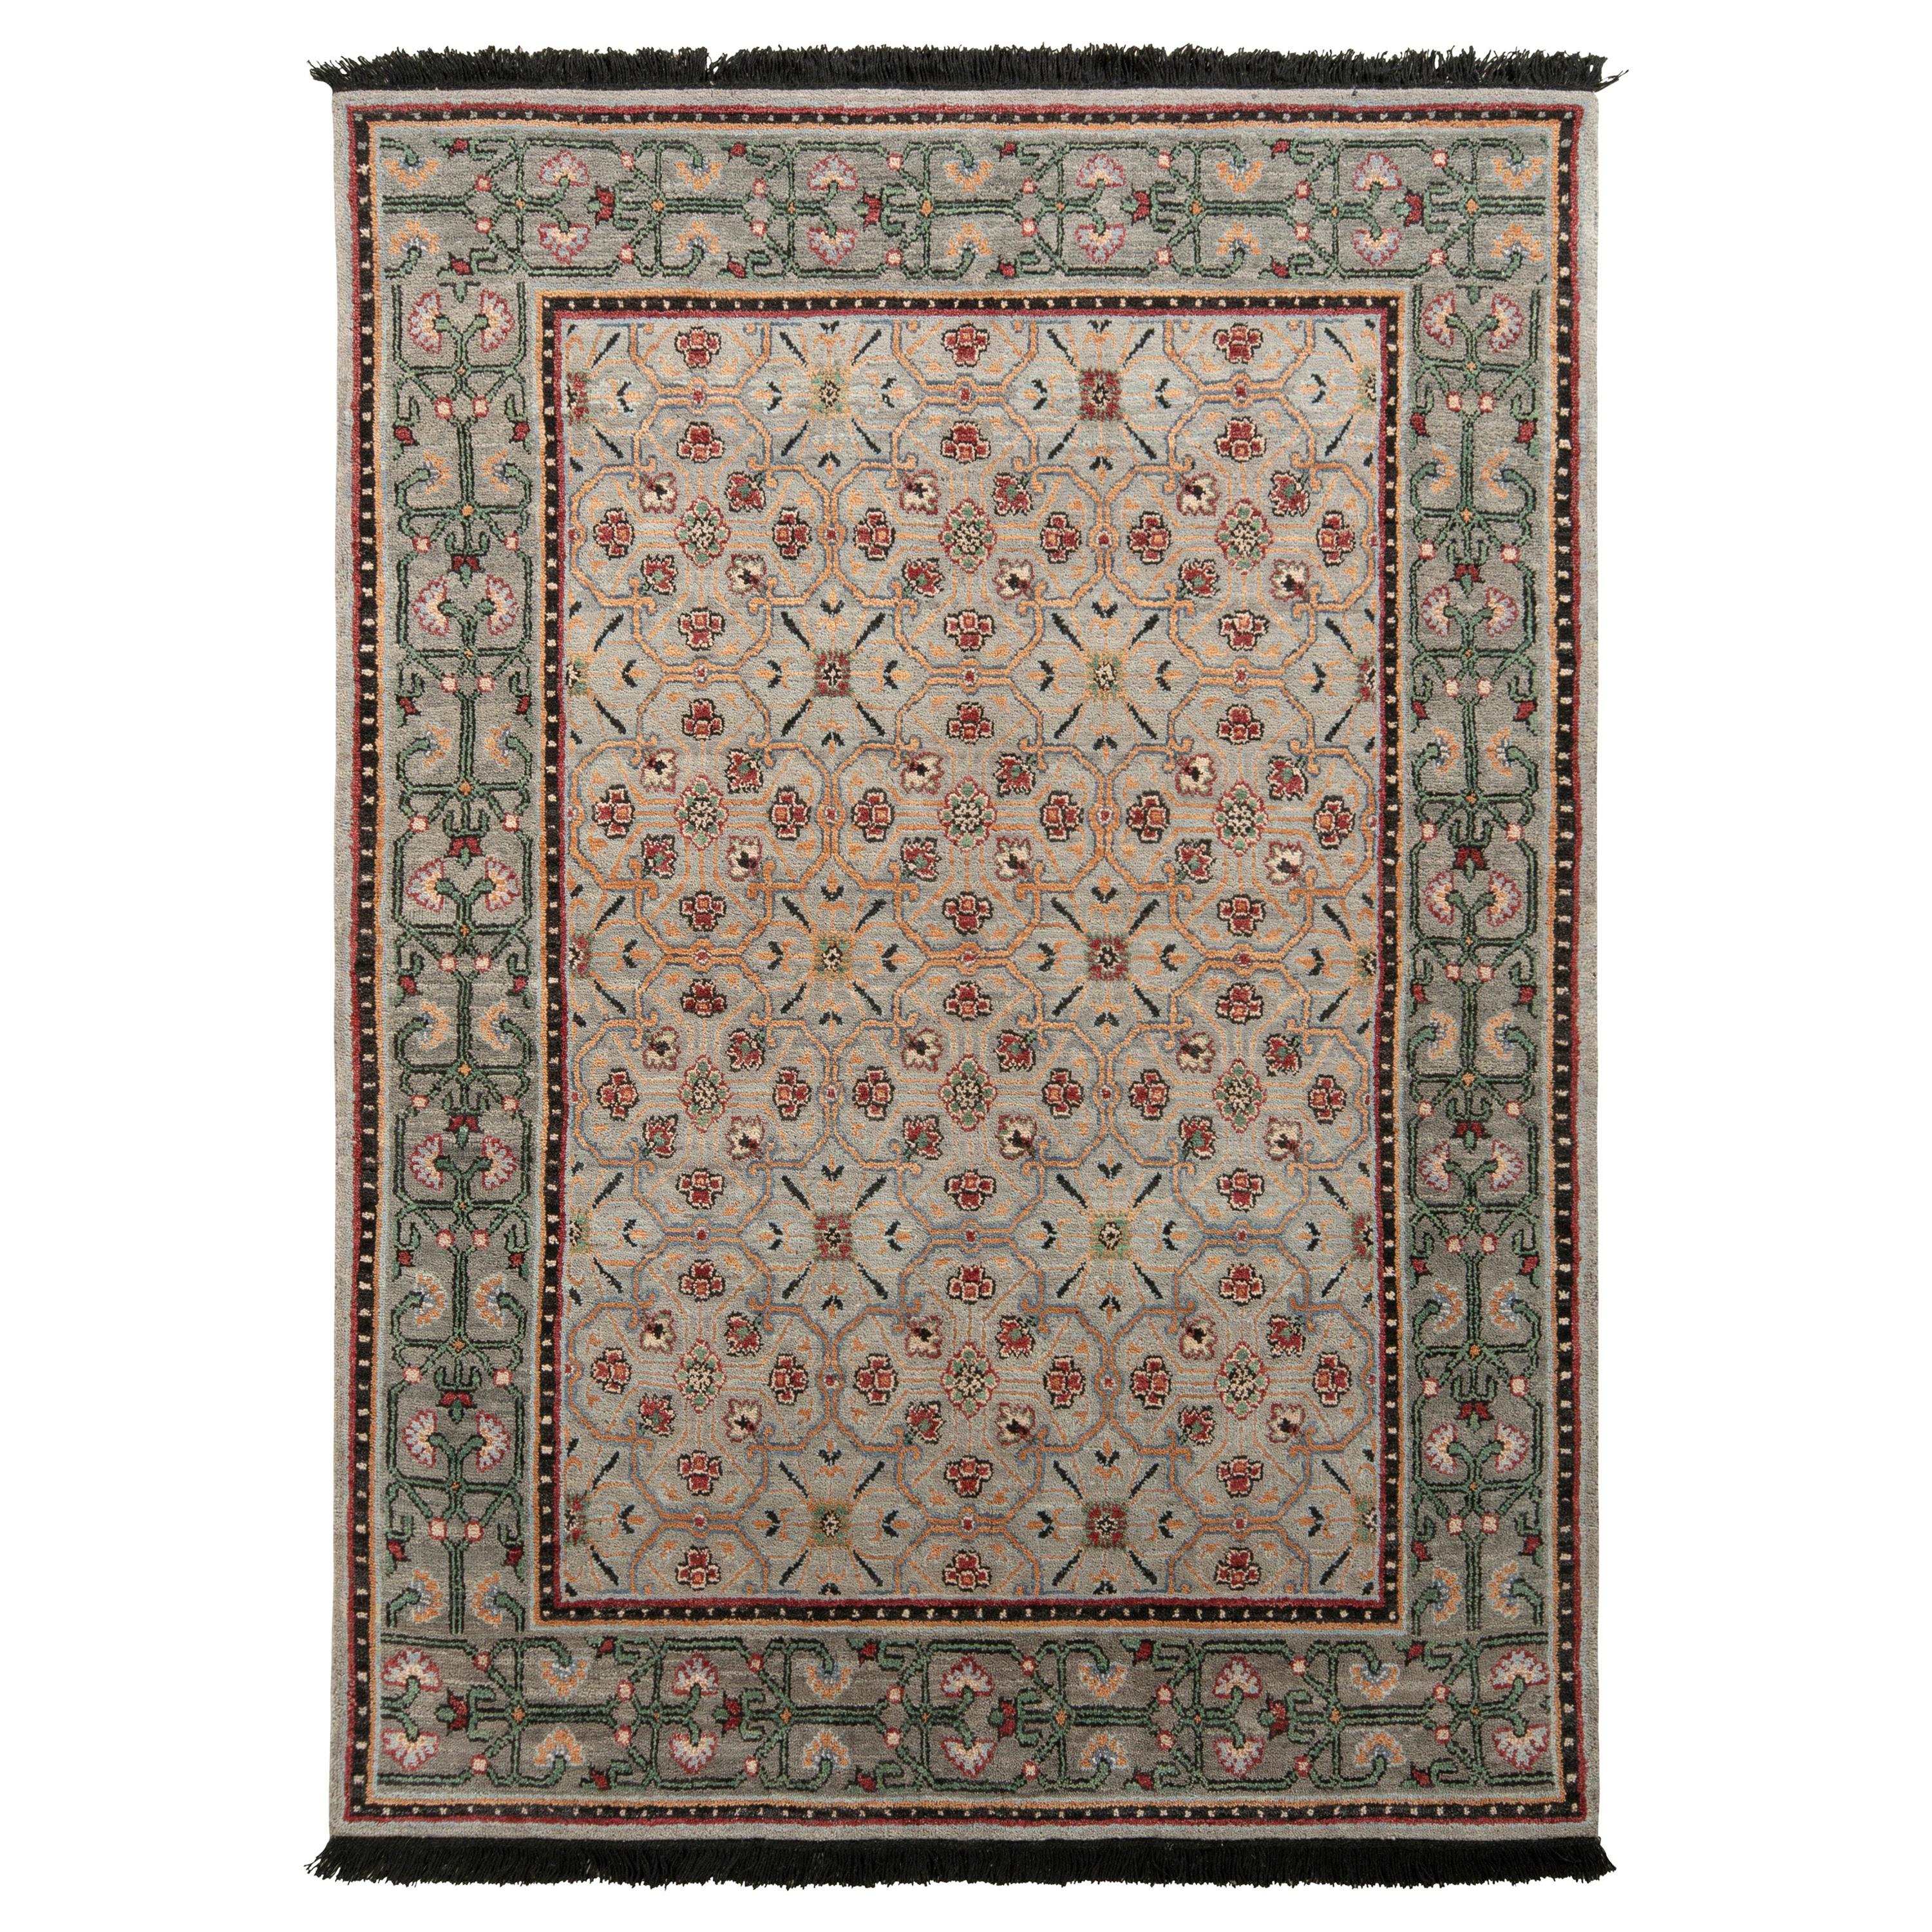 Rug & Kilim’s Transitional Style Rug in Green and Blue All over Floral Pattern For Sale